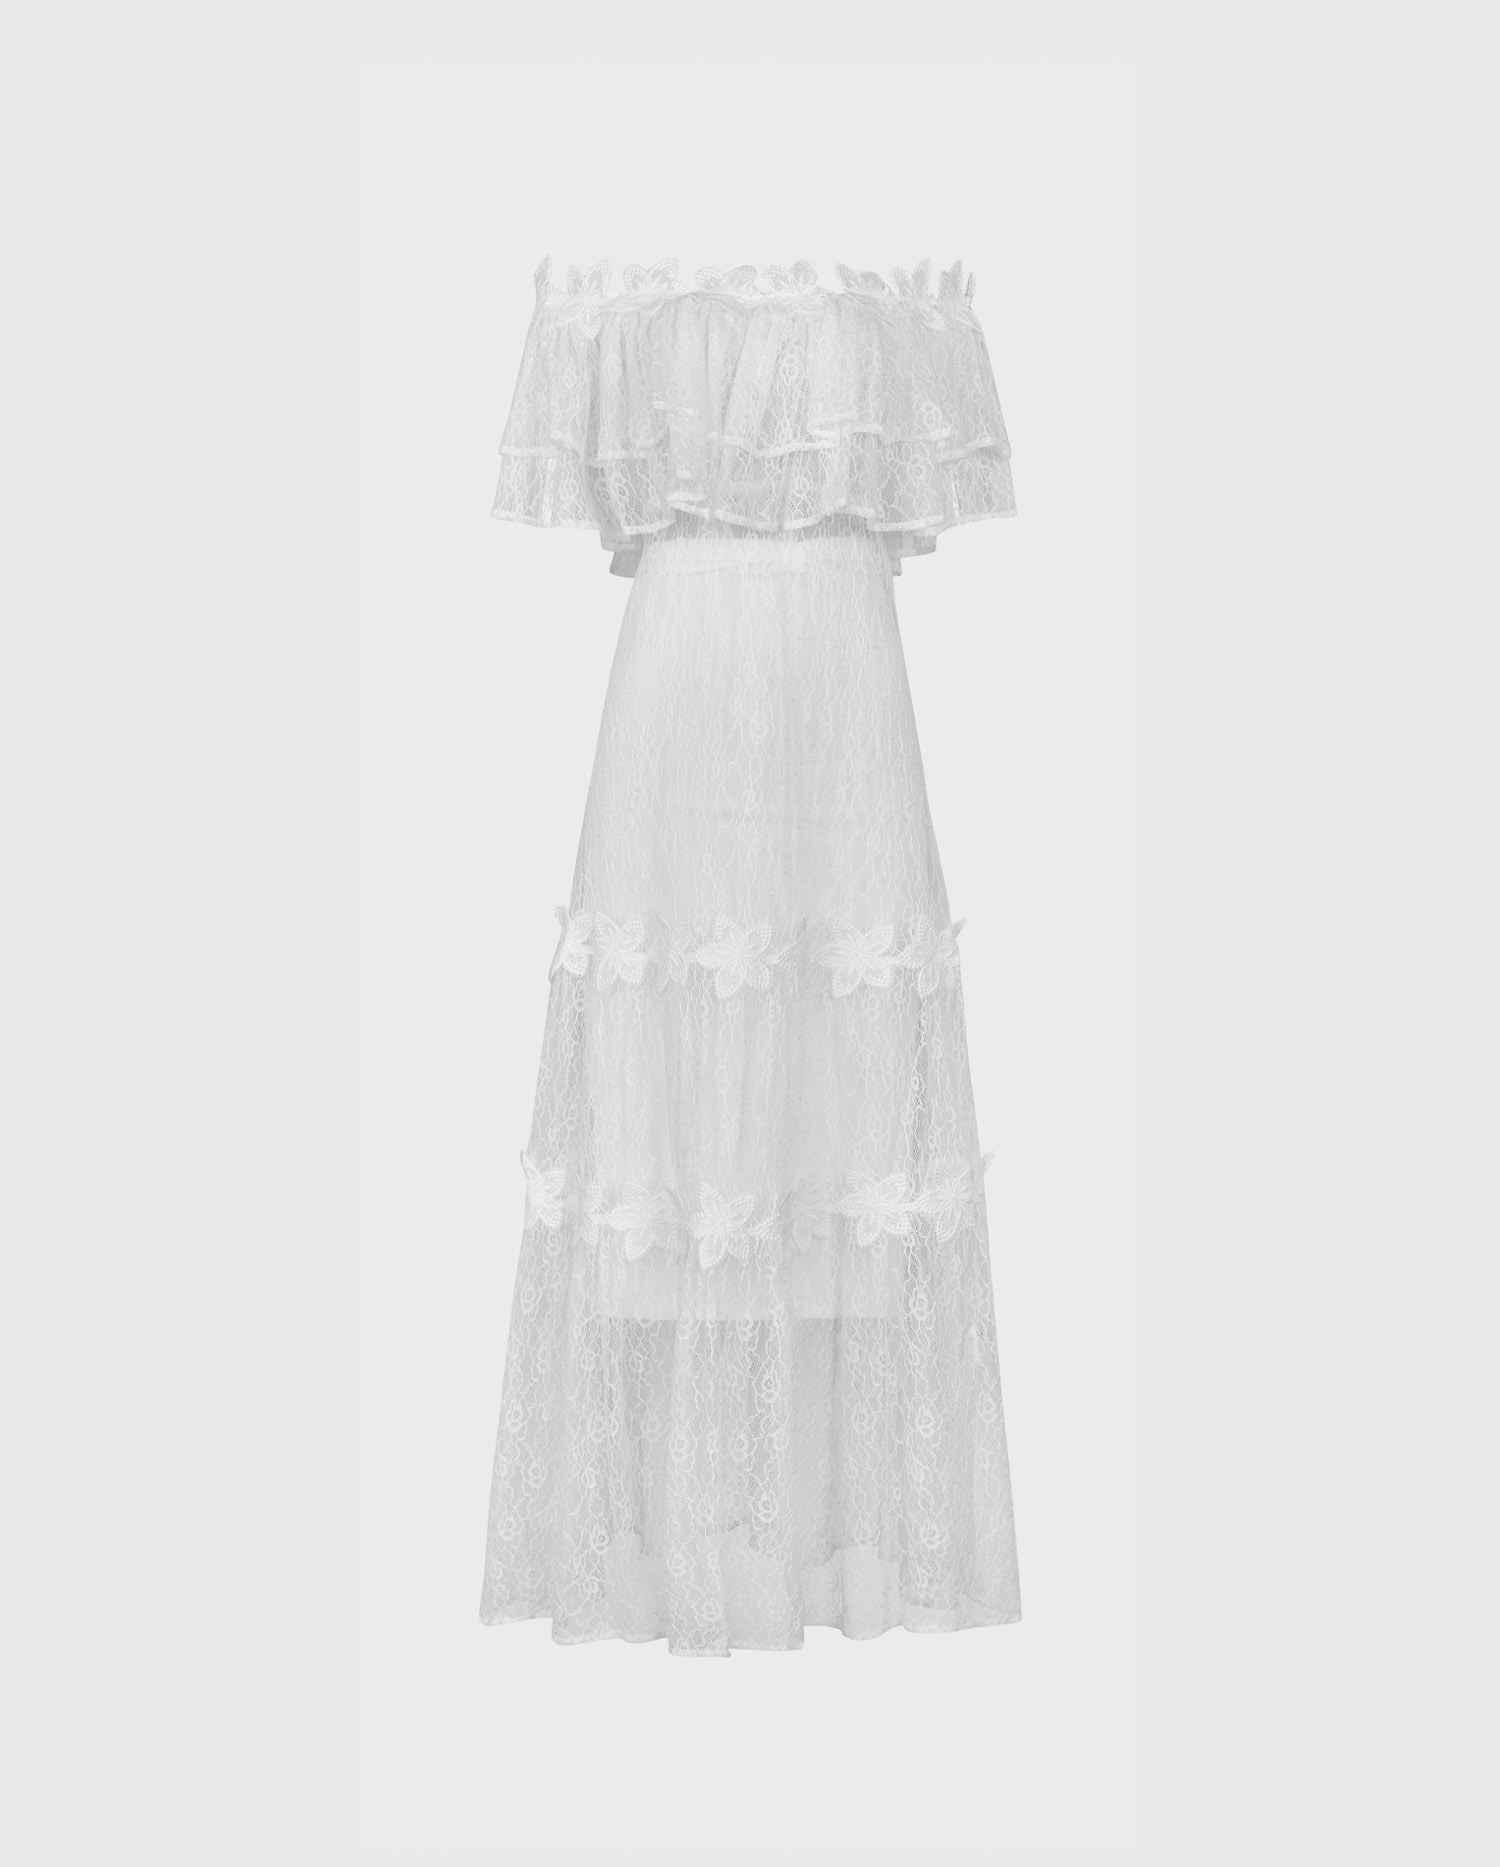 Discover the ALOHA White Off the Shoulder Lace Maxi Dress with Lace Flower Details from ANNE FONTAINE